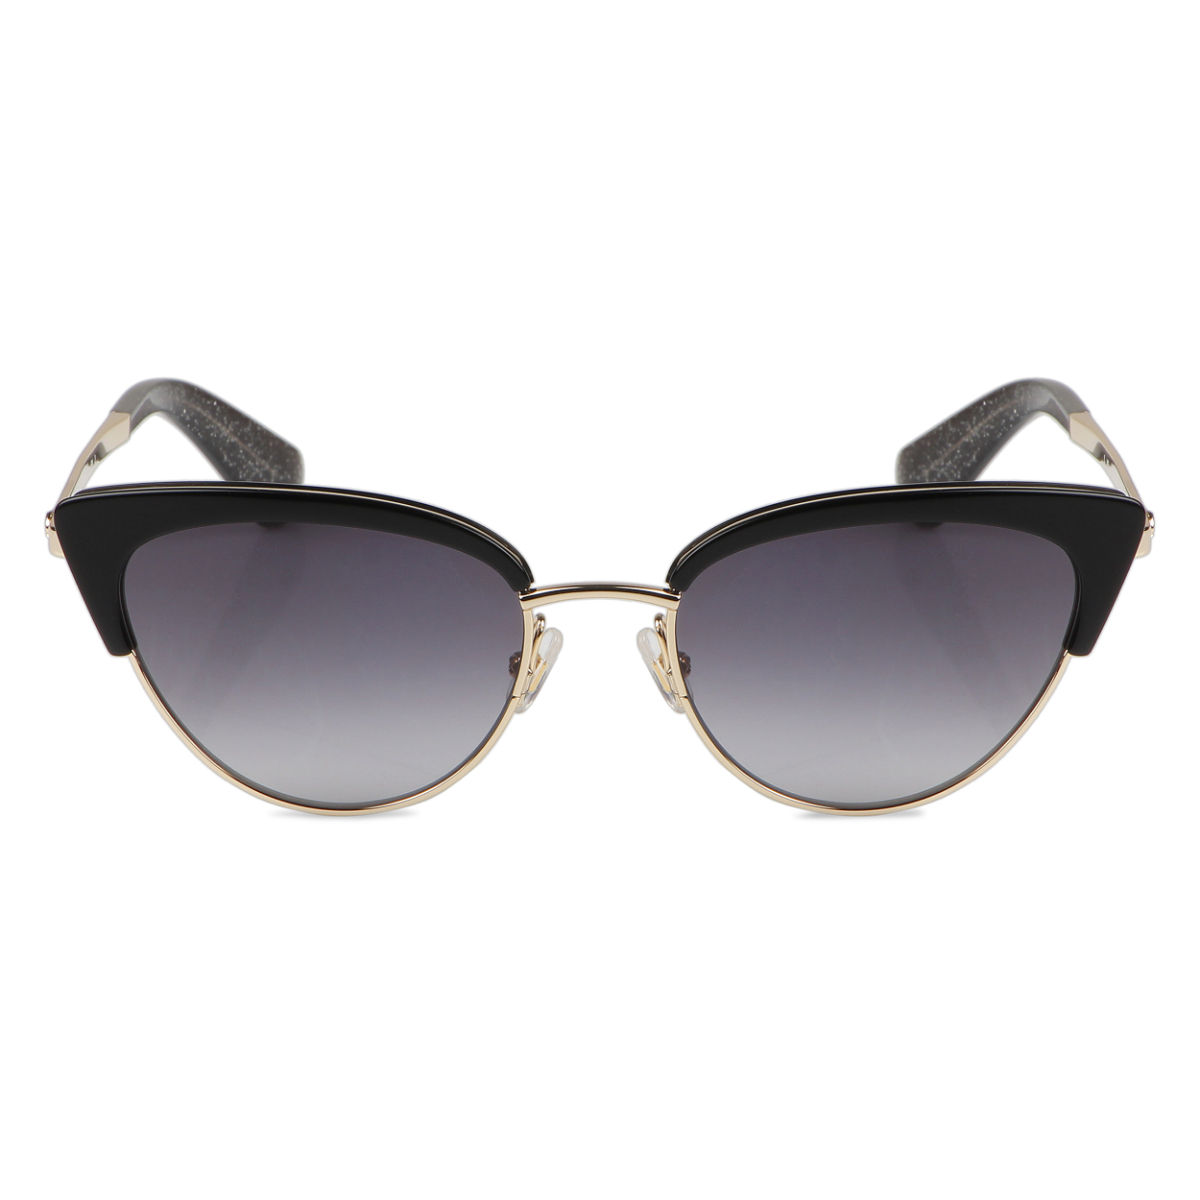 Kate Spade JAHNAM/S 807 52 9O Woman Cat-Eye Sunglass: Buy Kate Spade JAHNAM/S  807 52 9O Woman Cat-Eye Sunglass Online at Best Price in India | Nykaa